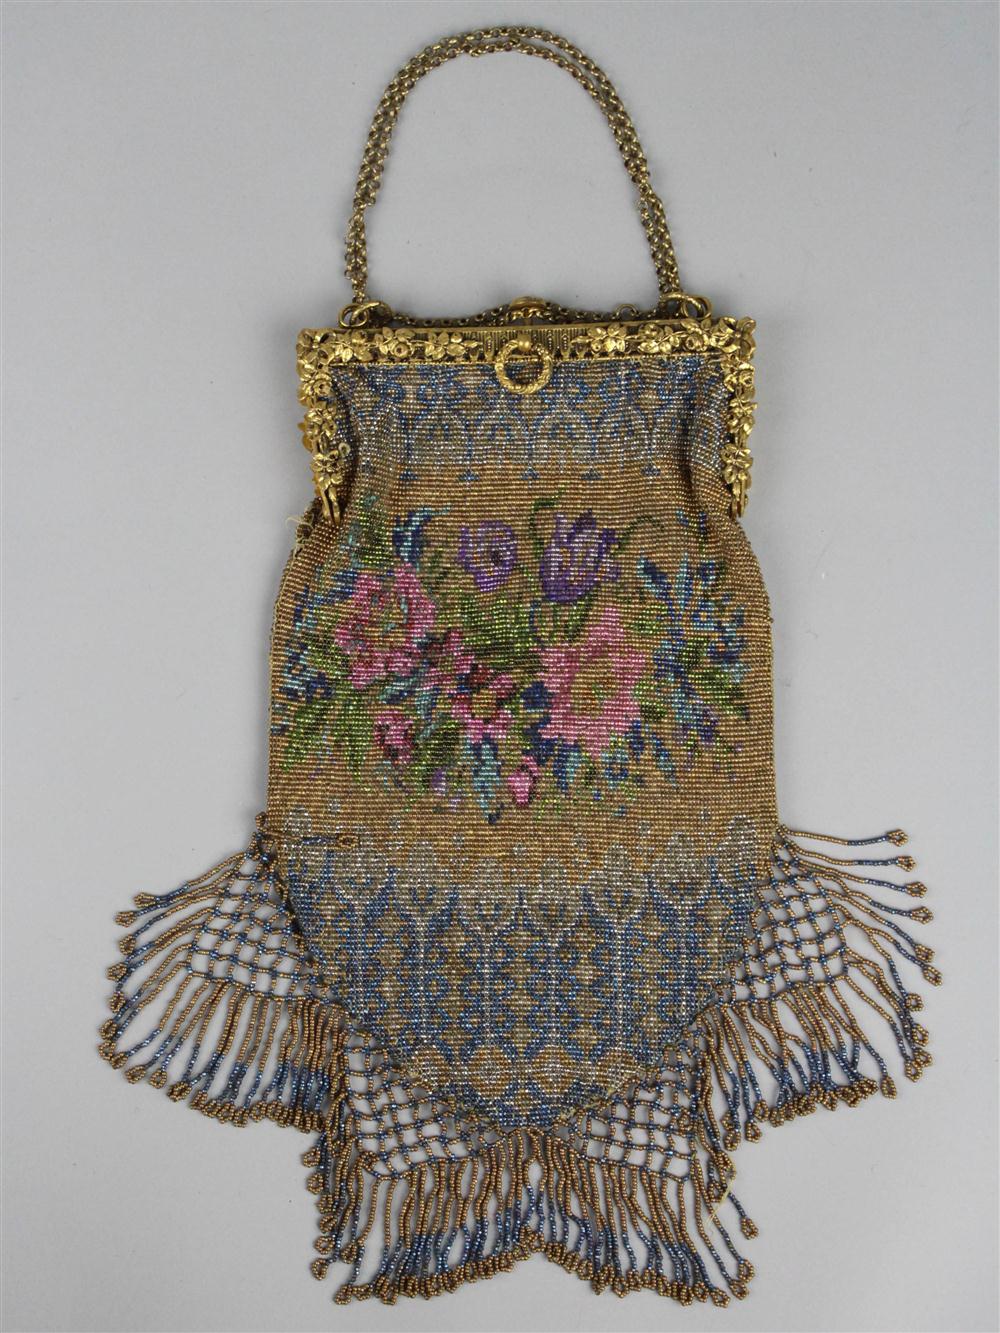 FRENCH GILT BEADED BAG c.1915 with